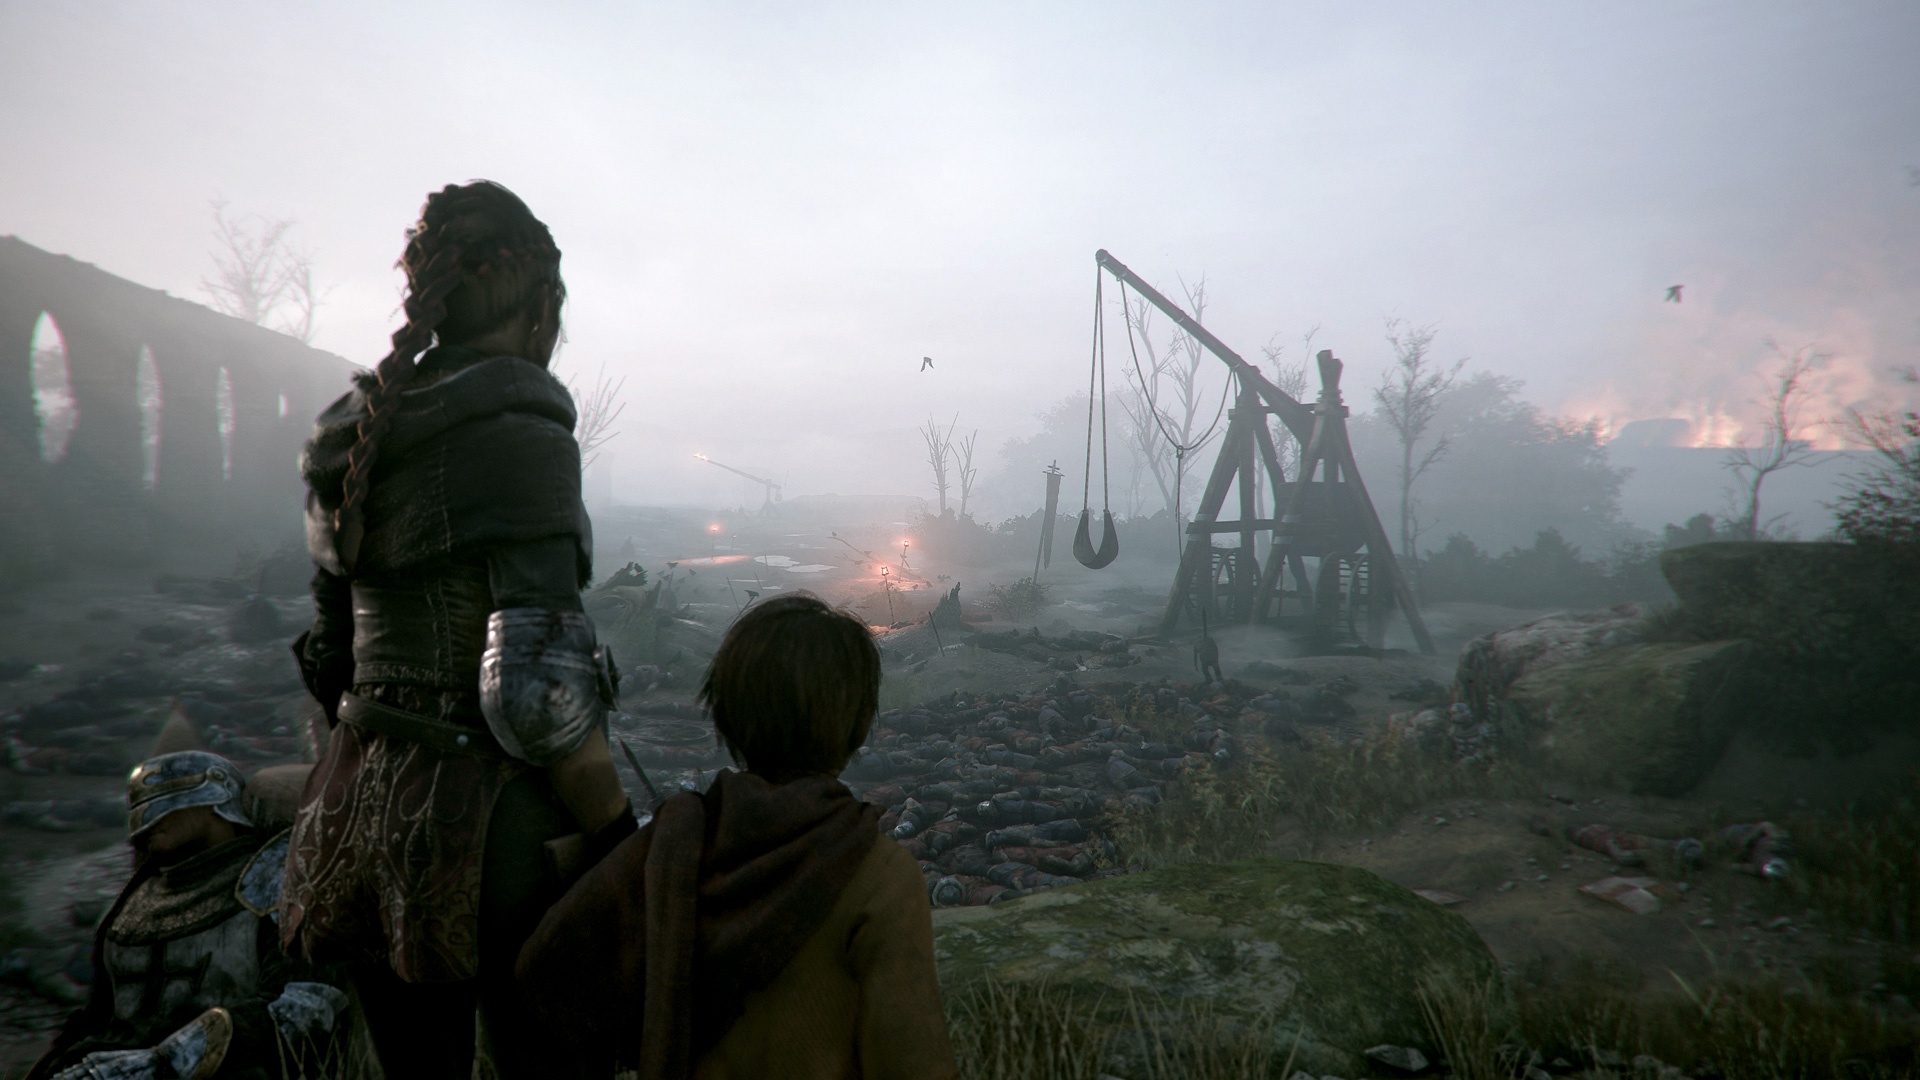 Dissecting A Plague Tale: Innocence